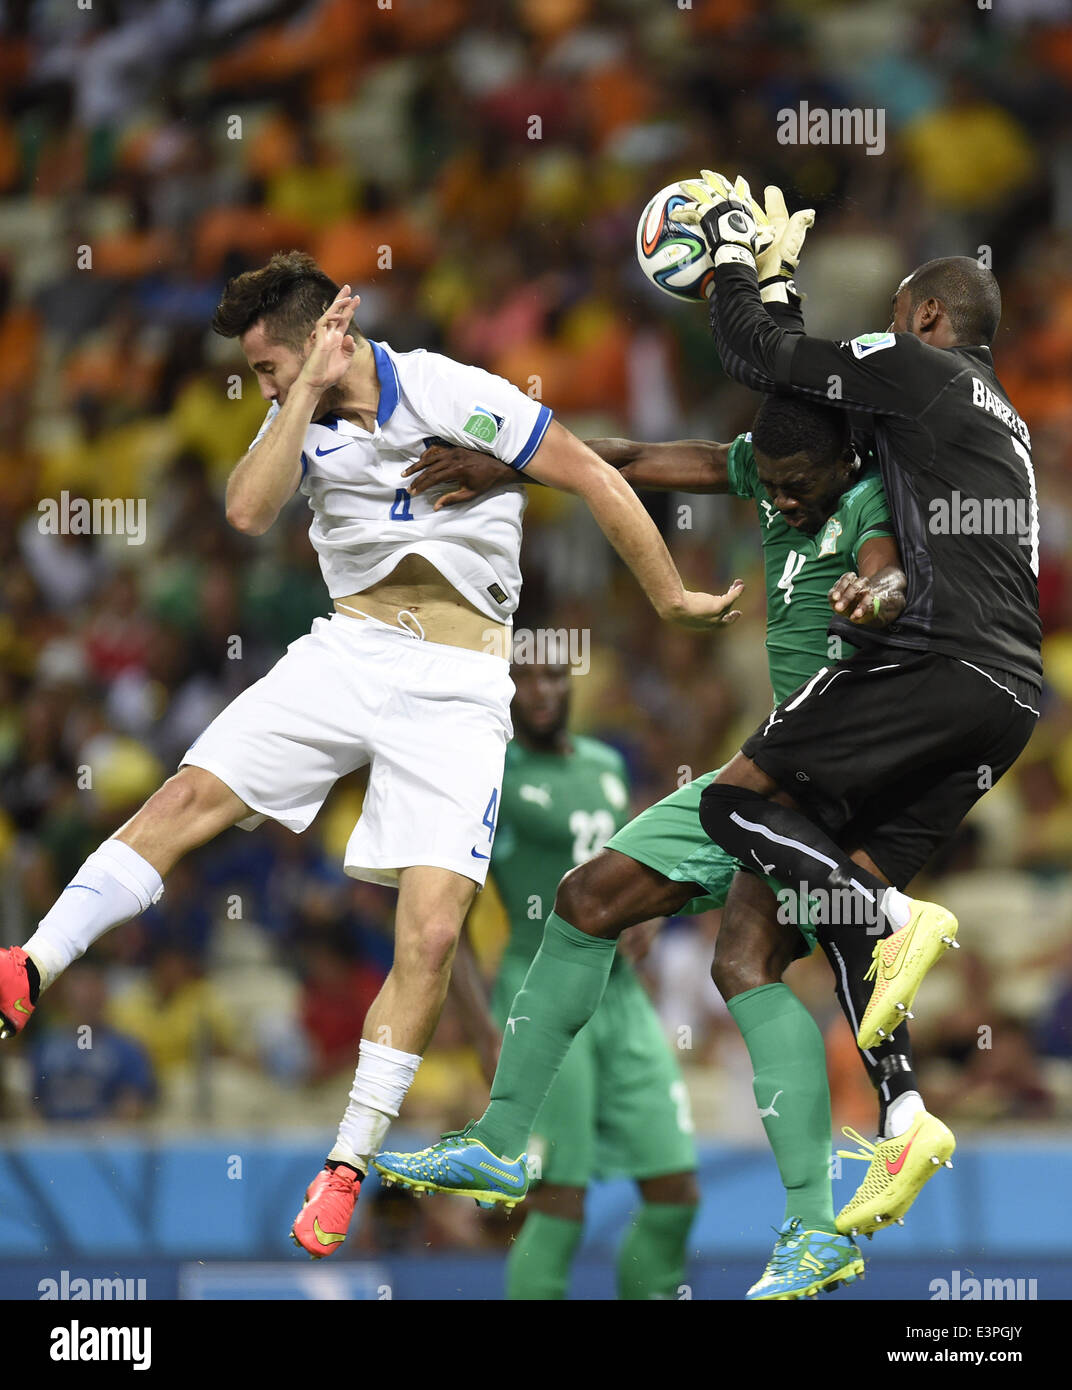 (140624) -- FORTALEZA, June 24, 2014 (Xinhua) -- Cote d'Ivoire's goalkeeper Boubacar Barry (1st R) blocks the ball during a Group C match between Greece and Cote d'Ivoire of 2014 FIFA World Cup at the Estadio Castelao Stadium in Fortaleza, Brazil, June 24, 2014. (Xinhua/Yang Lei)(xzj) Stock Photo